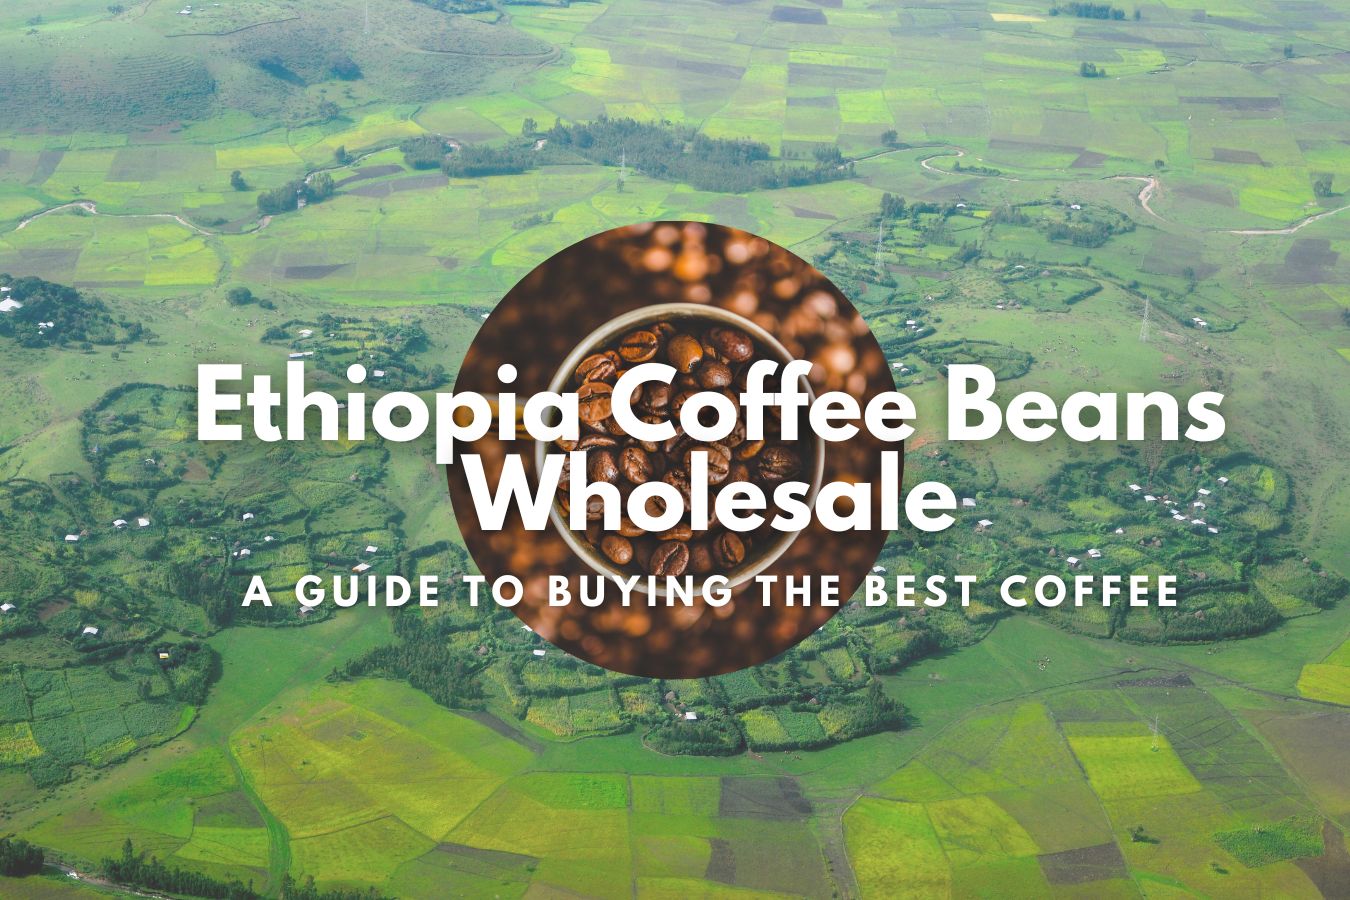 Ethiopia Coffee Beans Wholesale A Guide to Buying the Best Coffee